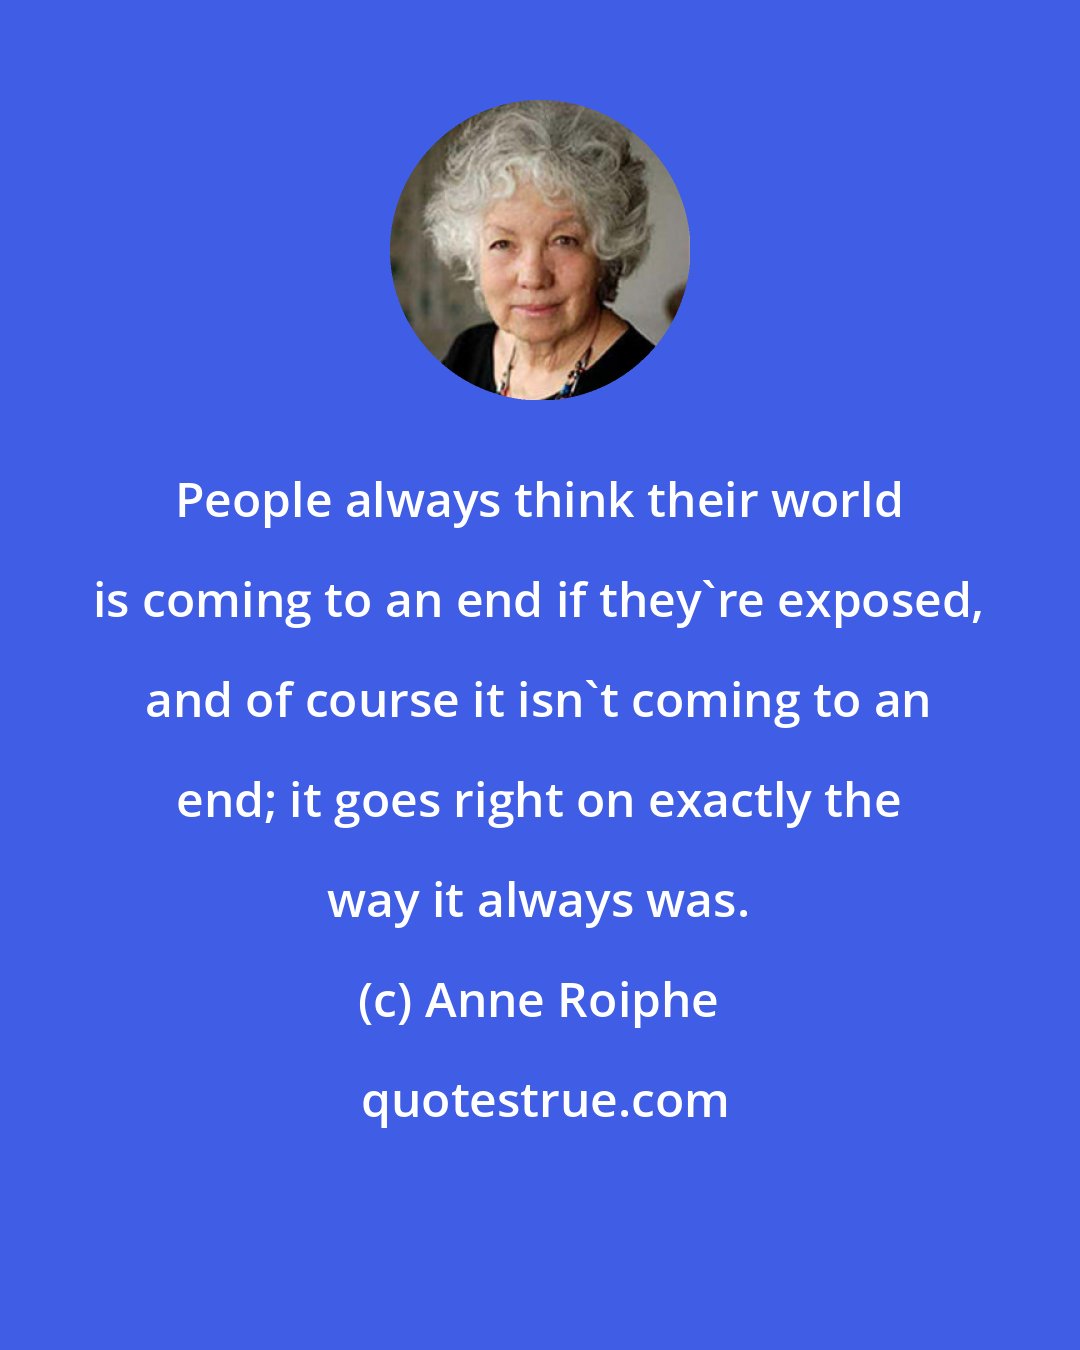 Anne Roiphe: People always think their world is coming to an end if they're exposed, and of course it isn't coming to an end; it goes right on exactly the way it always was.